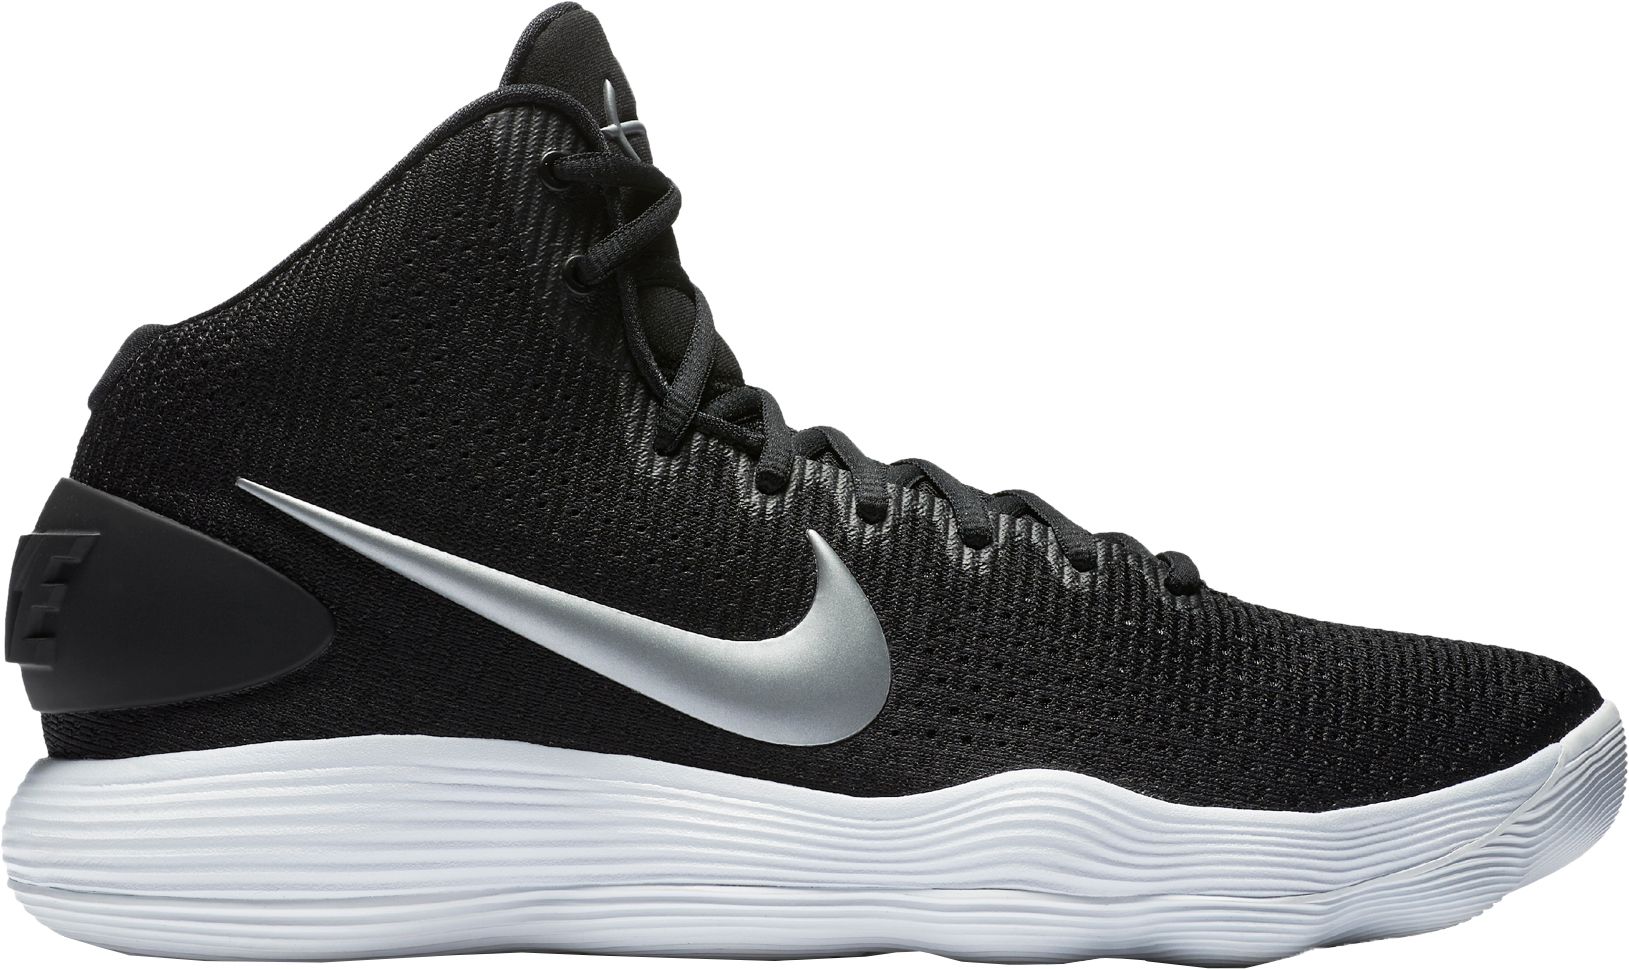 Basketball Shoes for Men | DICK'S Sporting Goods